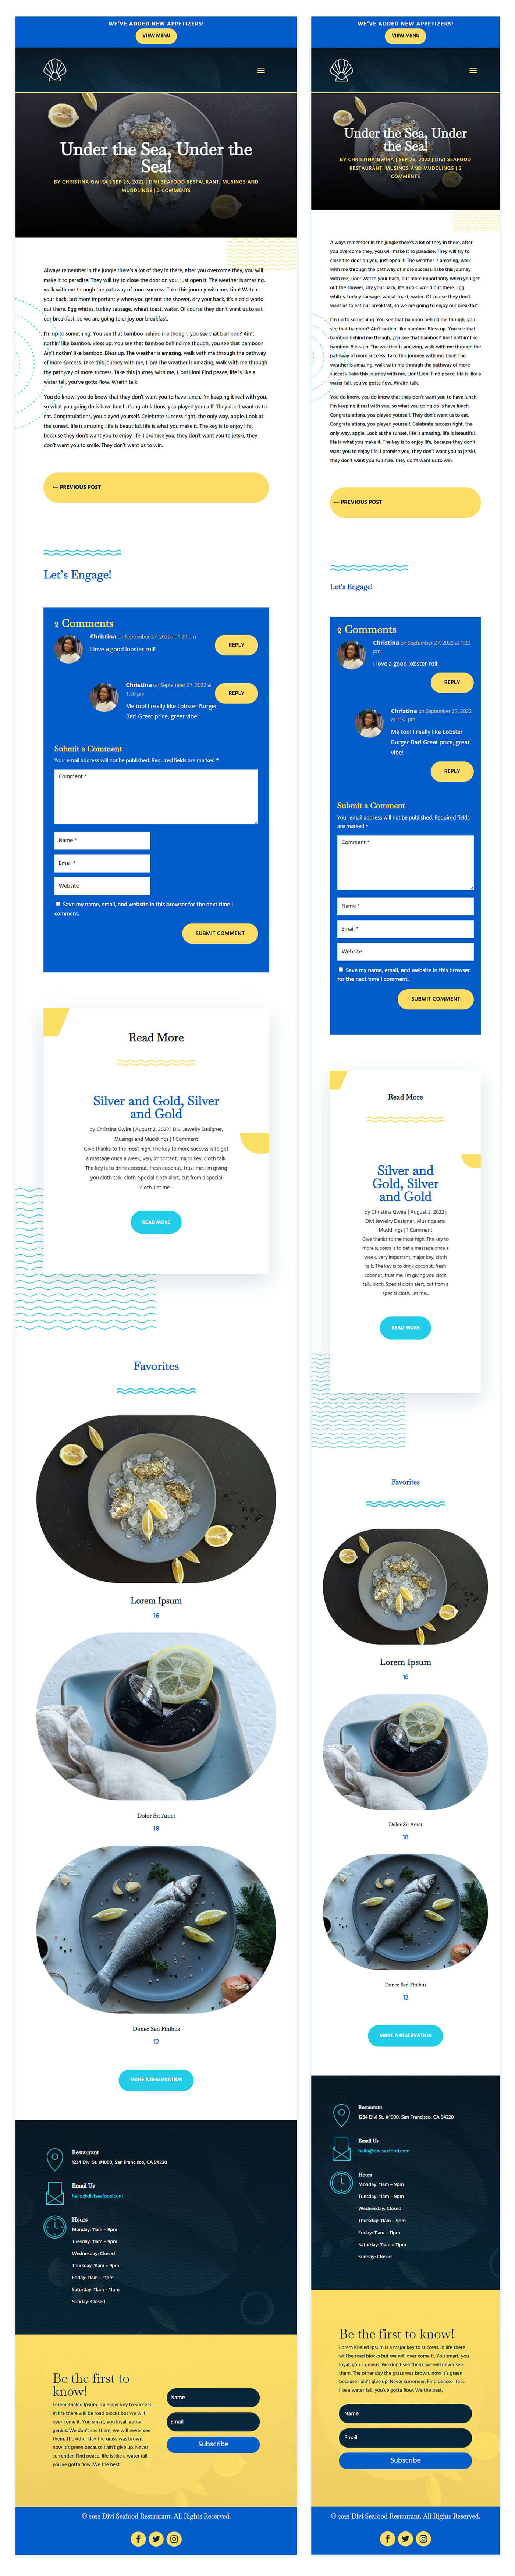 Divi Seafood Restaurant Blog Post Template for Tablet and Mobile